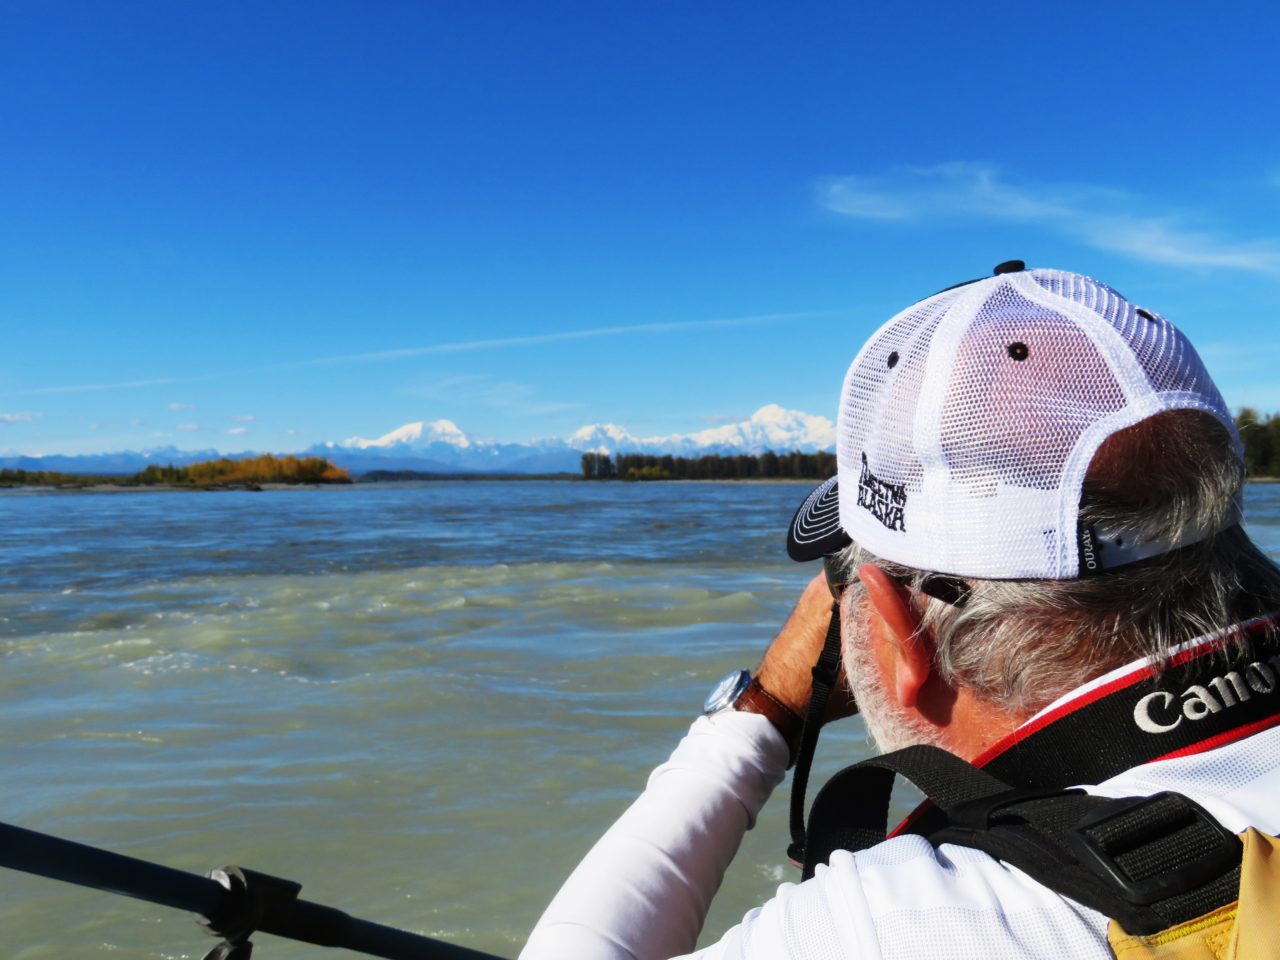 Rafting down the Talkeetna River during our Alaska Cruise with Princess Cruises